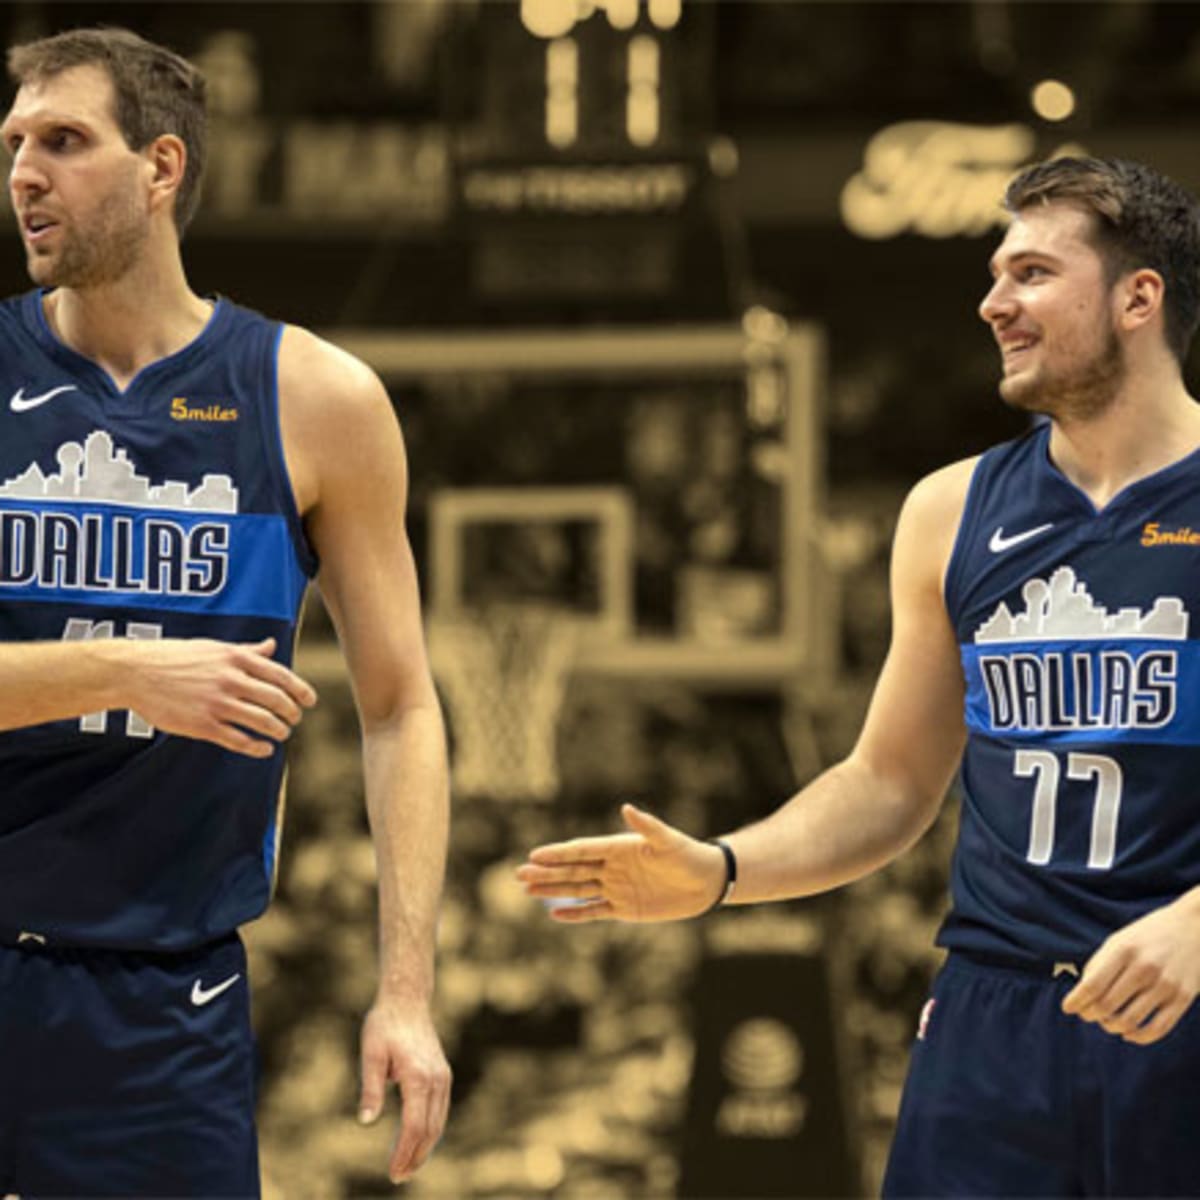 Dallas Mavericks top plays: Luka Doncic triple-double or Dirk Nowitzki the  All-Star?